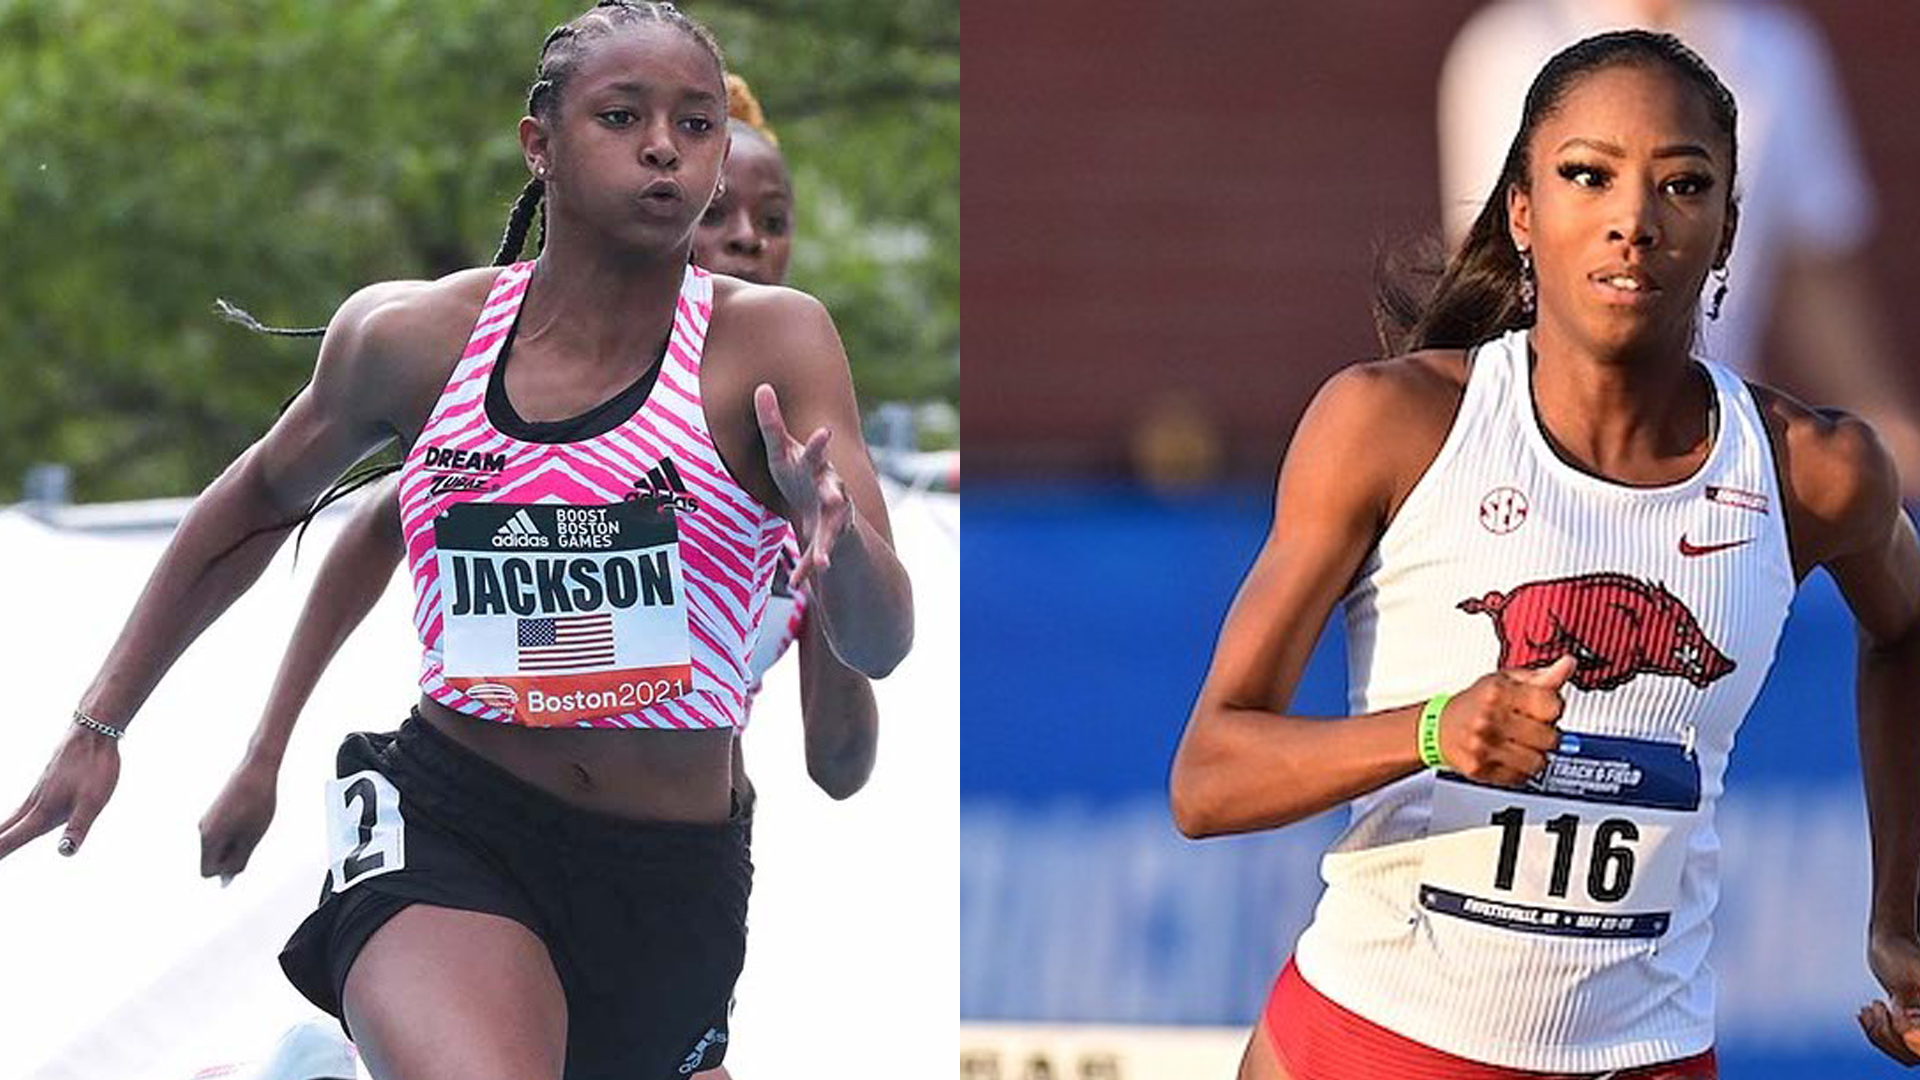 Shawnti Jackson and Britton Wilson are the names you'll be hearing a lot in track and field